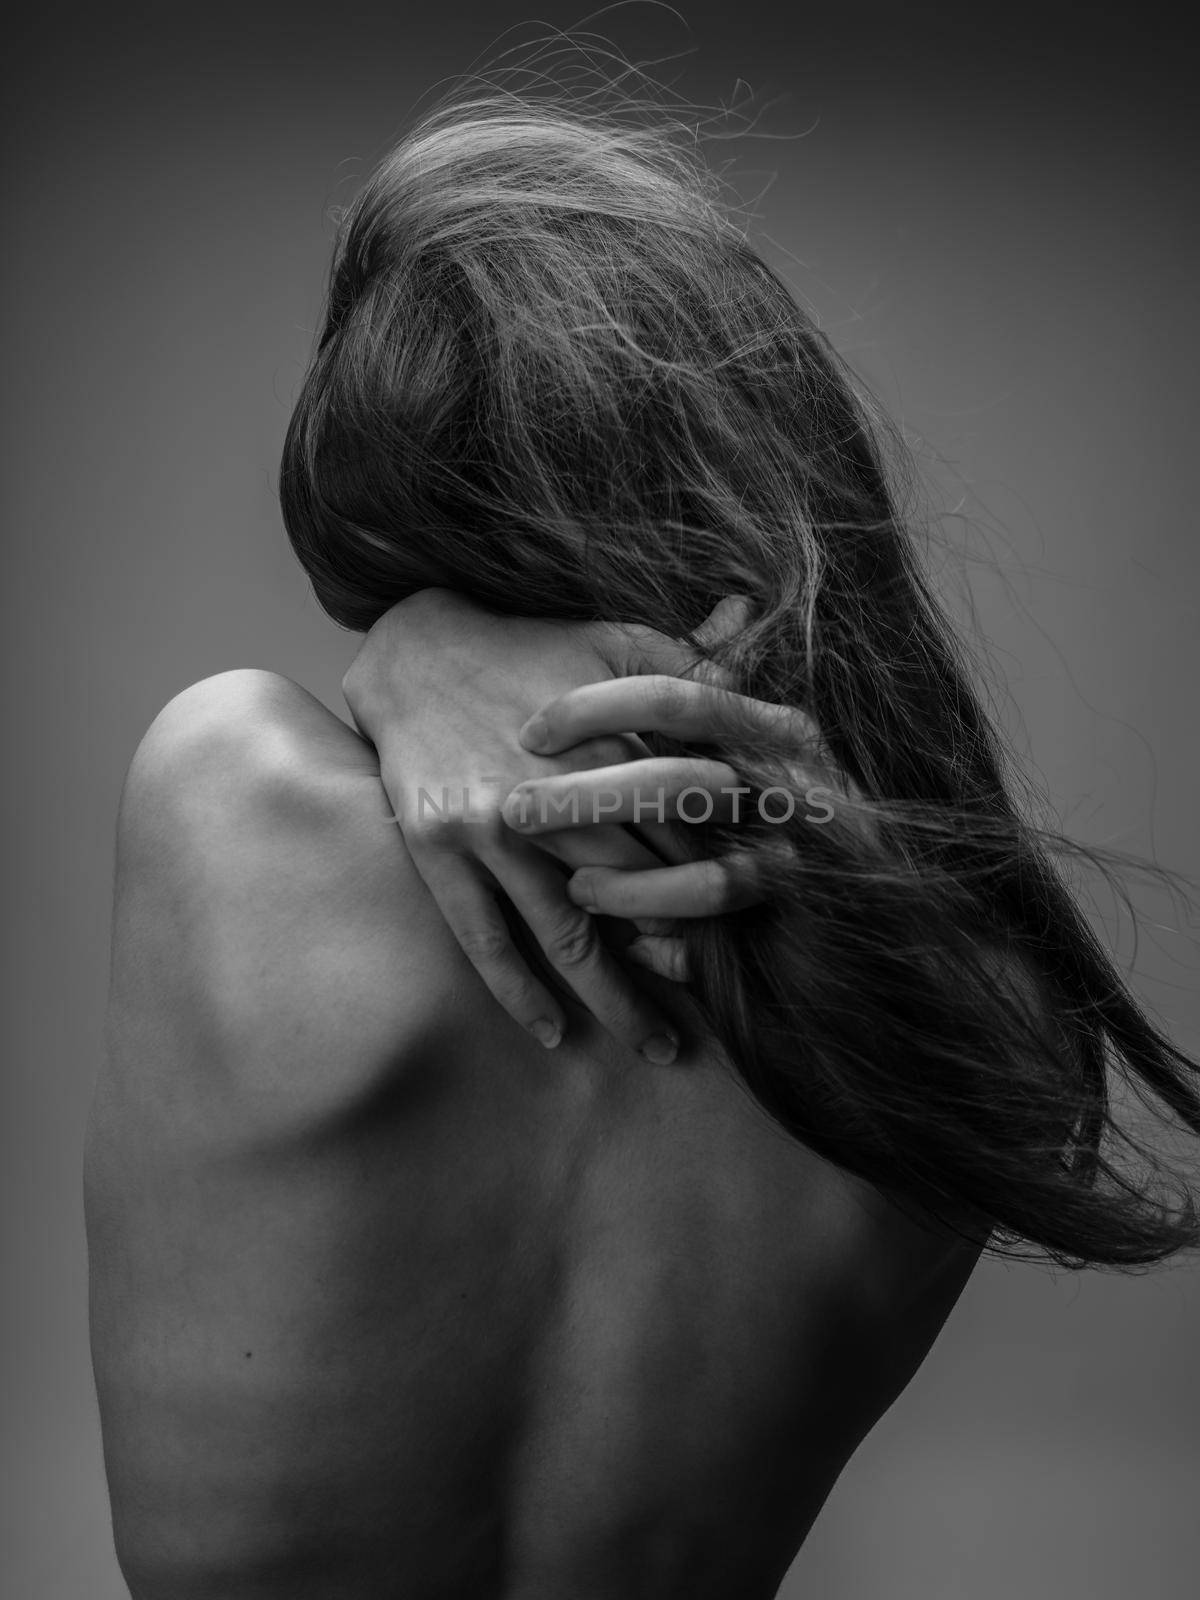 The woman in the gray photograph is touching herself with her bare back. High quality photo